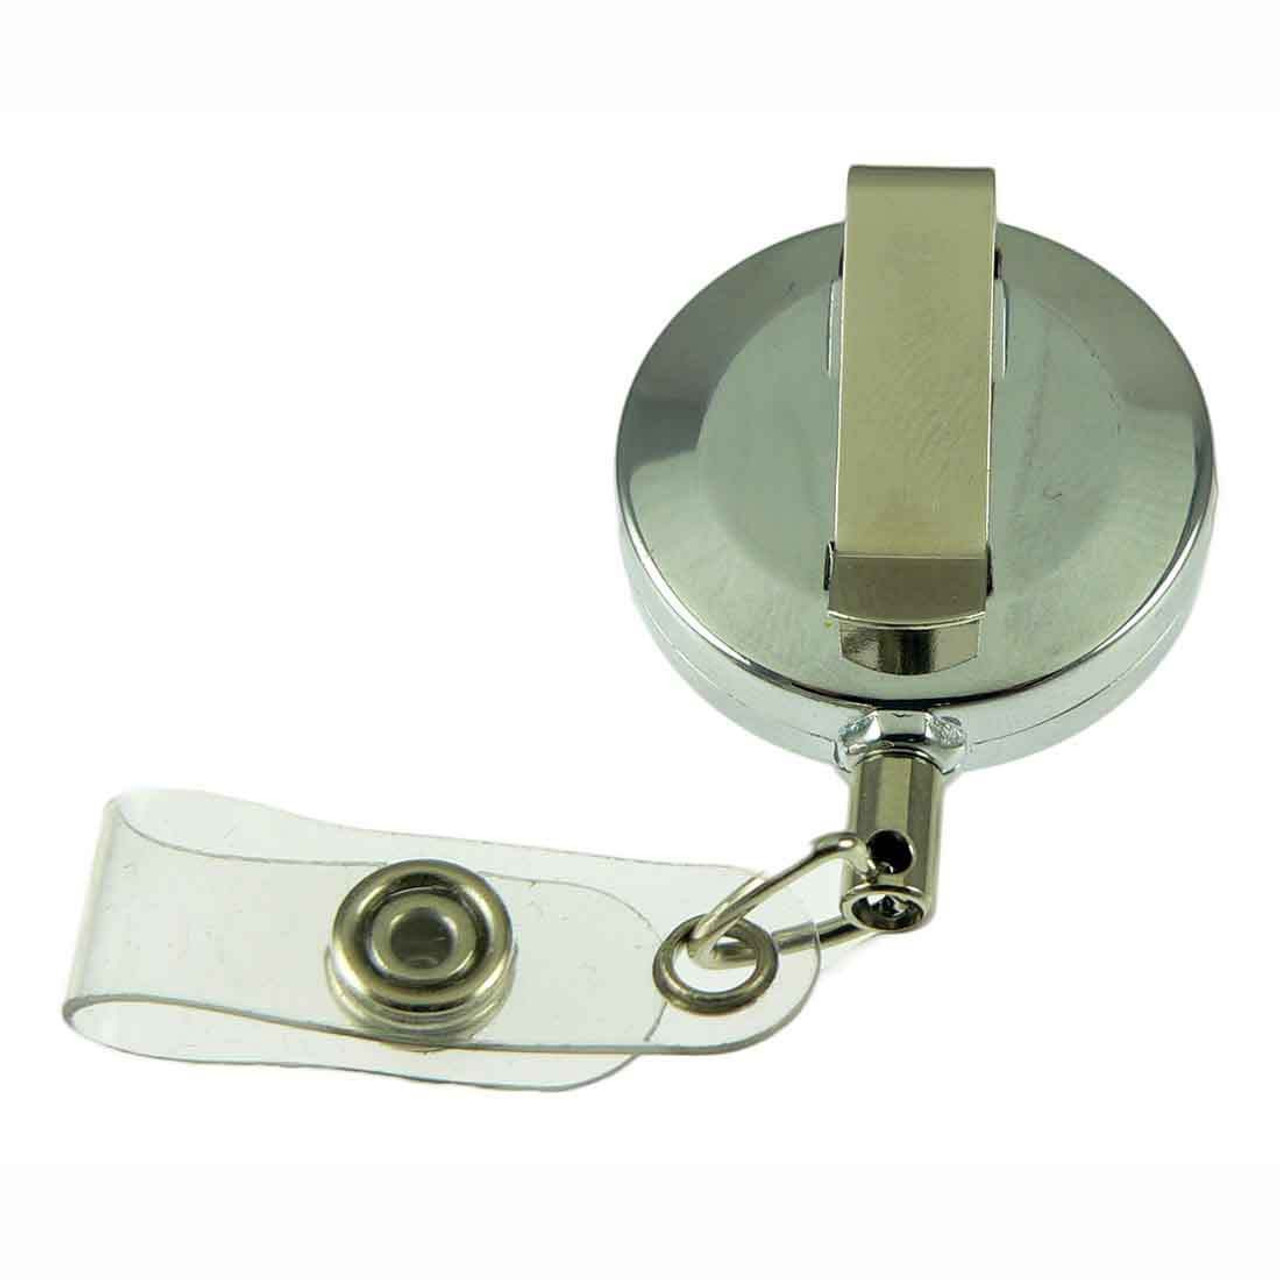 CBP Field Operations Patch Retractable ID Holder Reel